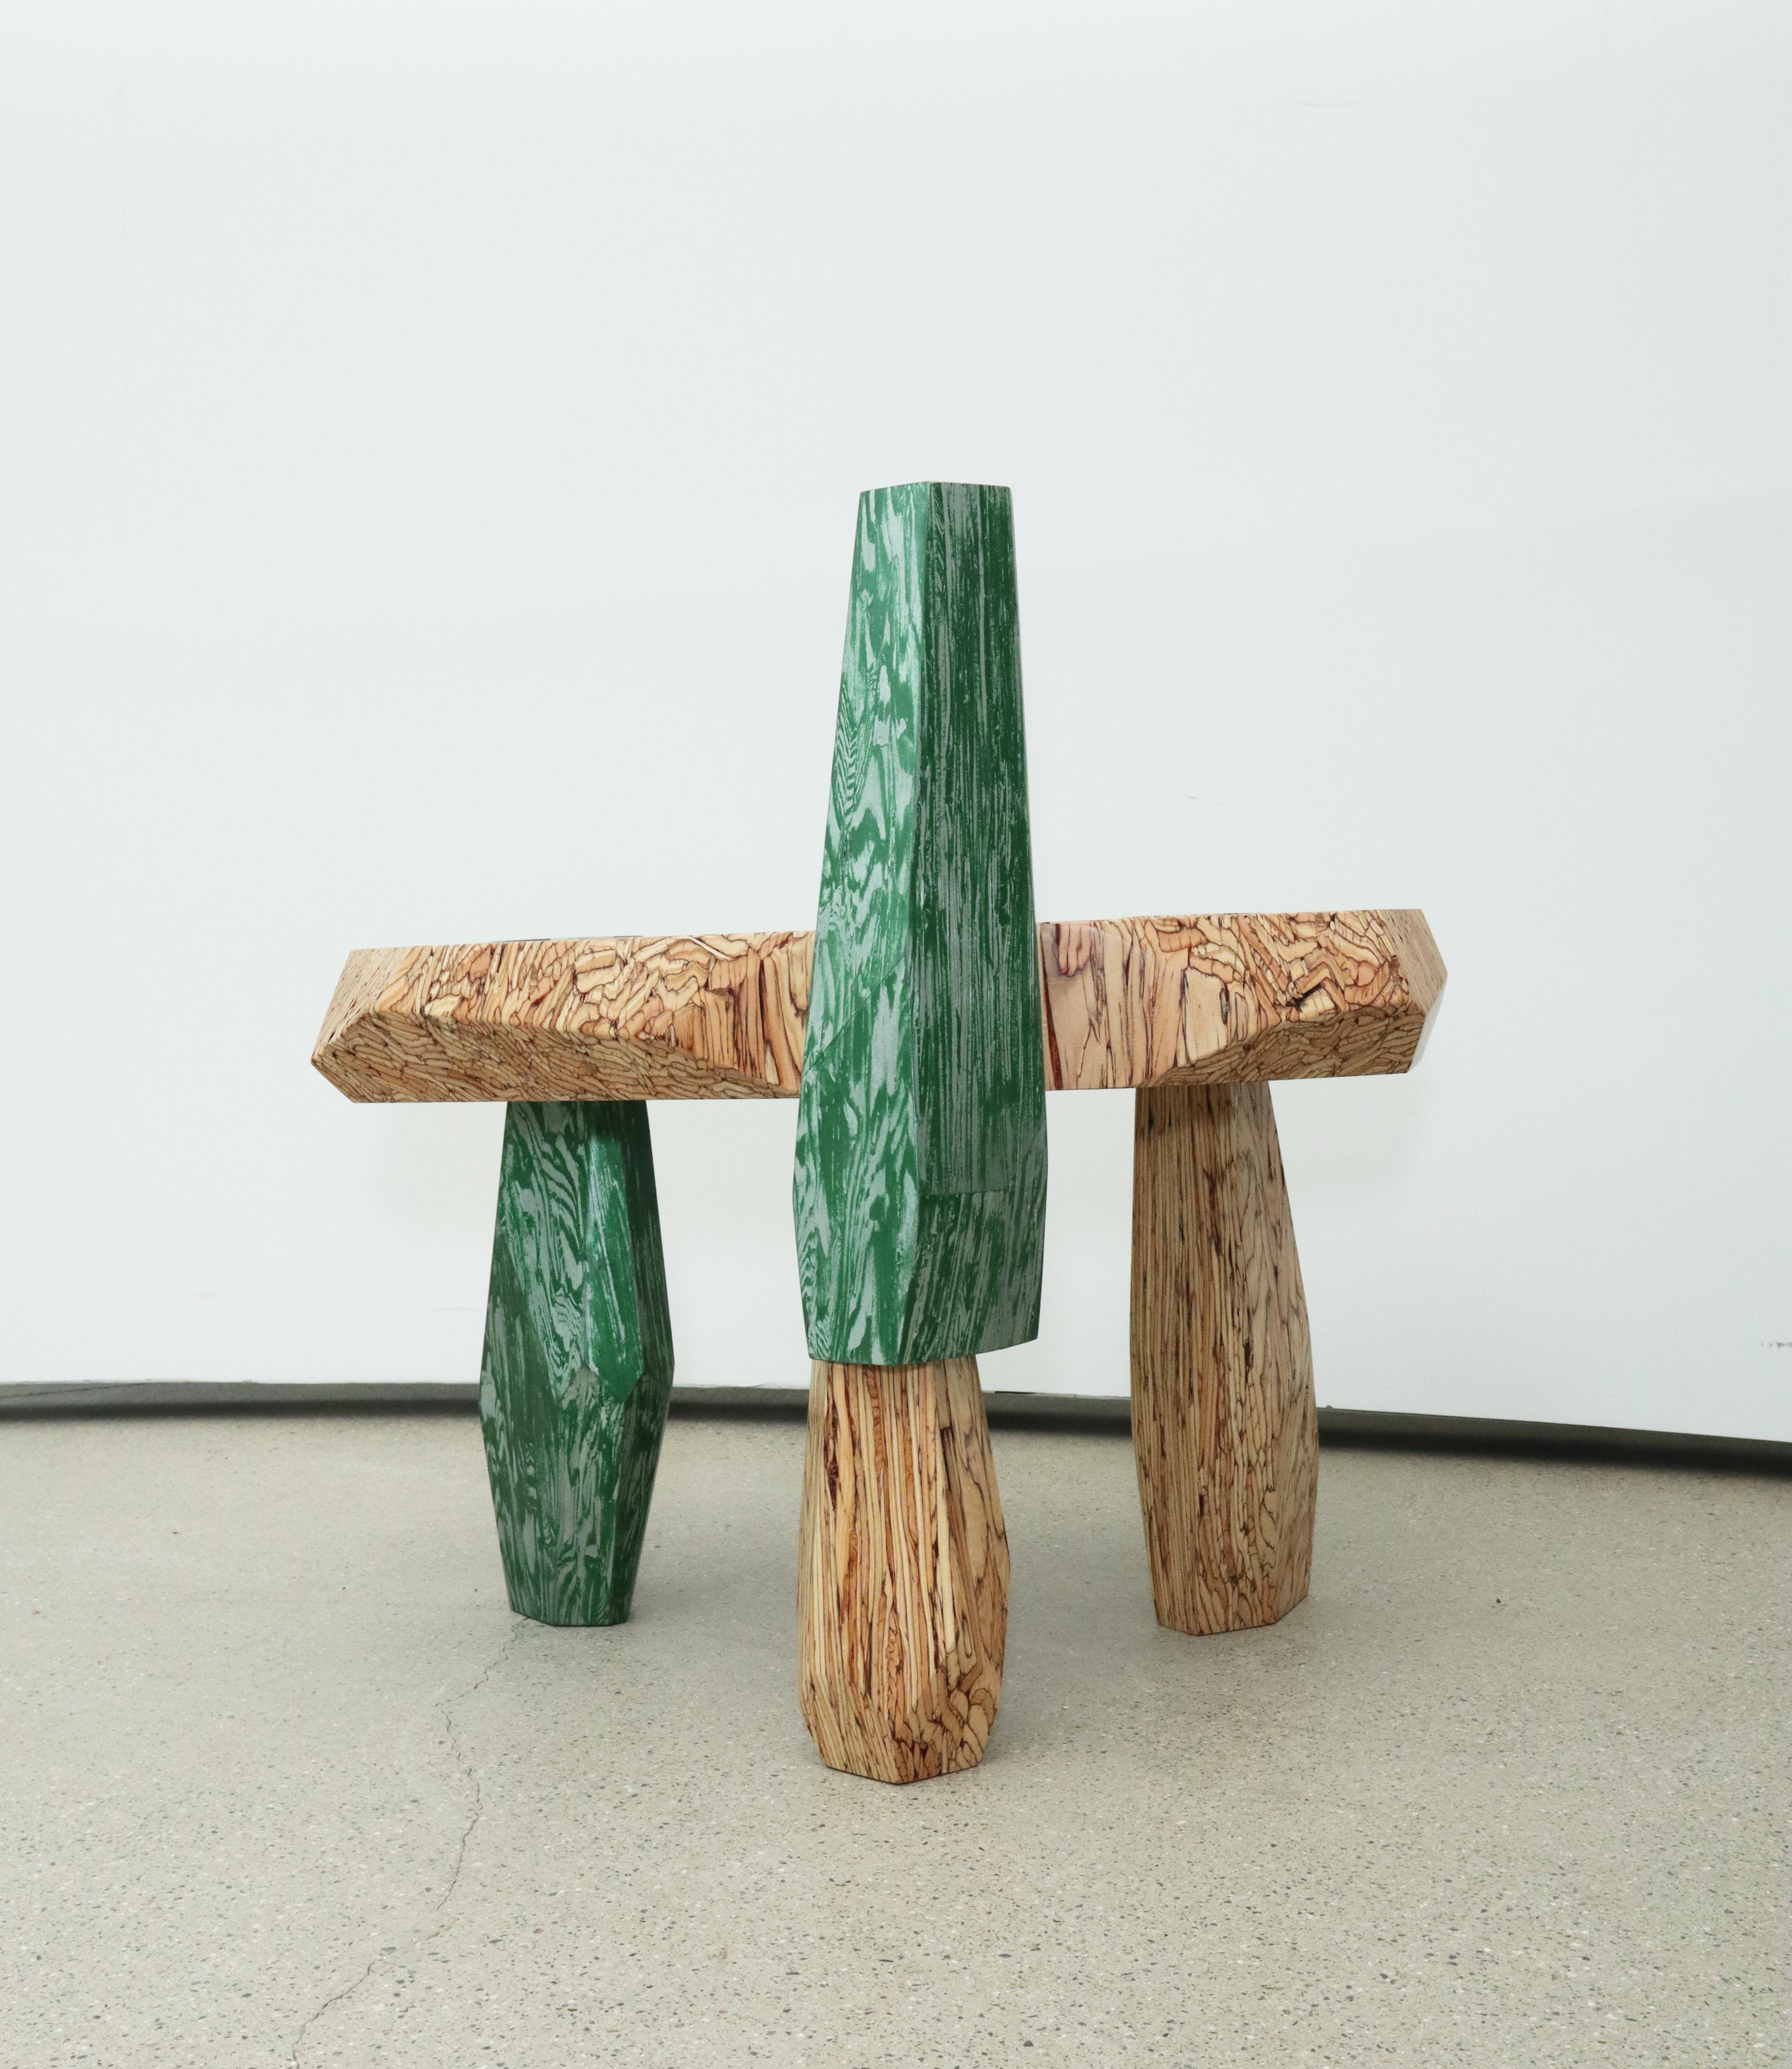 Wood Primitive Structures Side Table #2 by Jongwon Lee For Sale